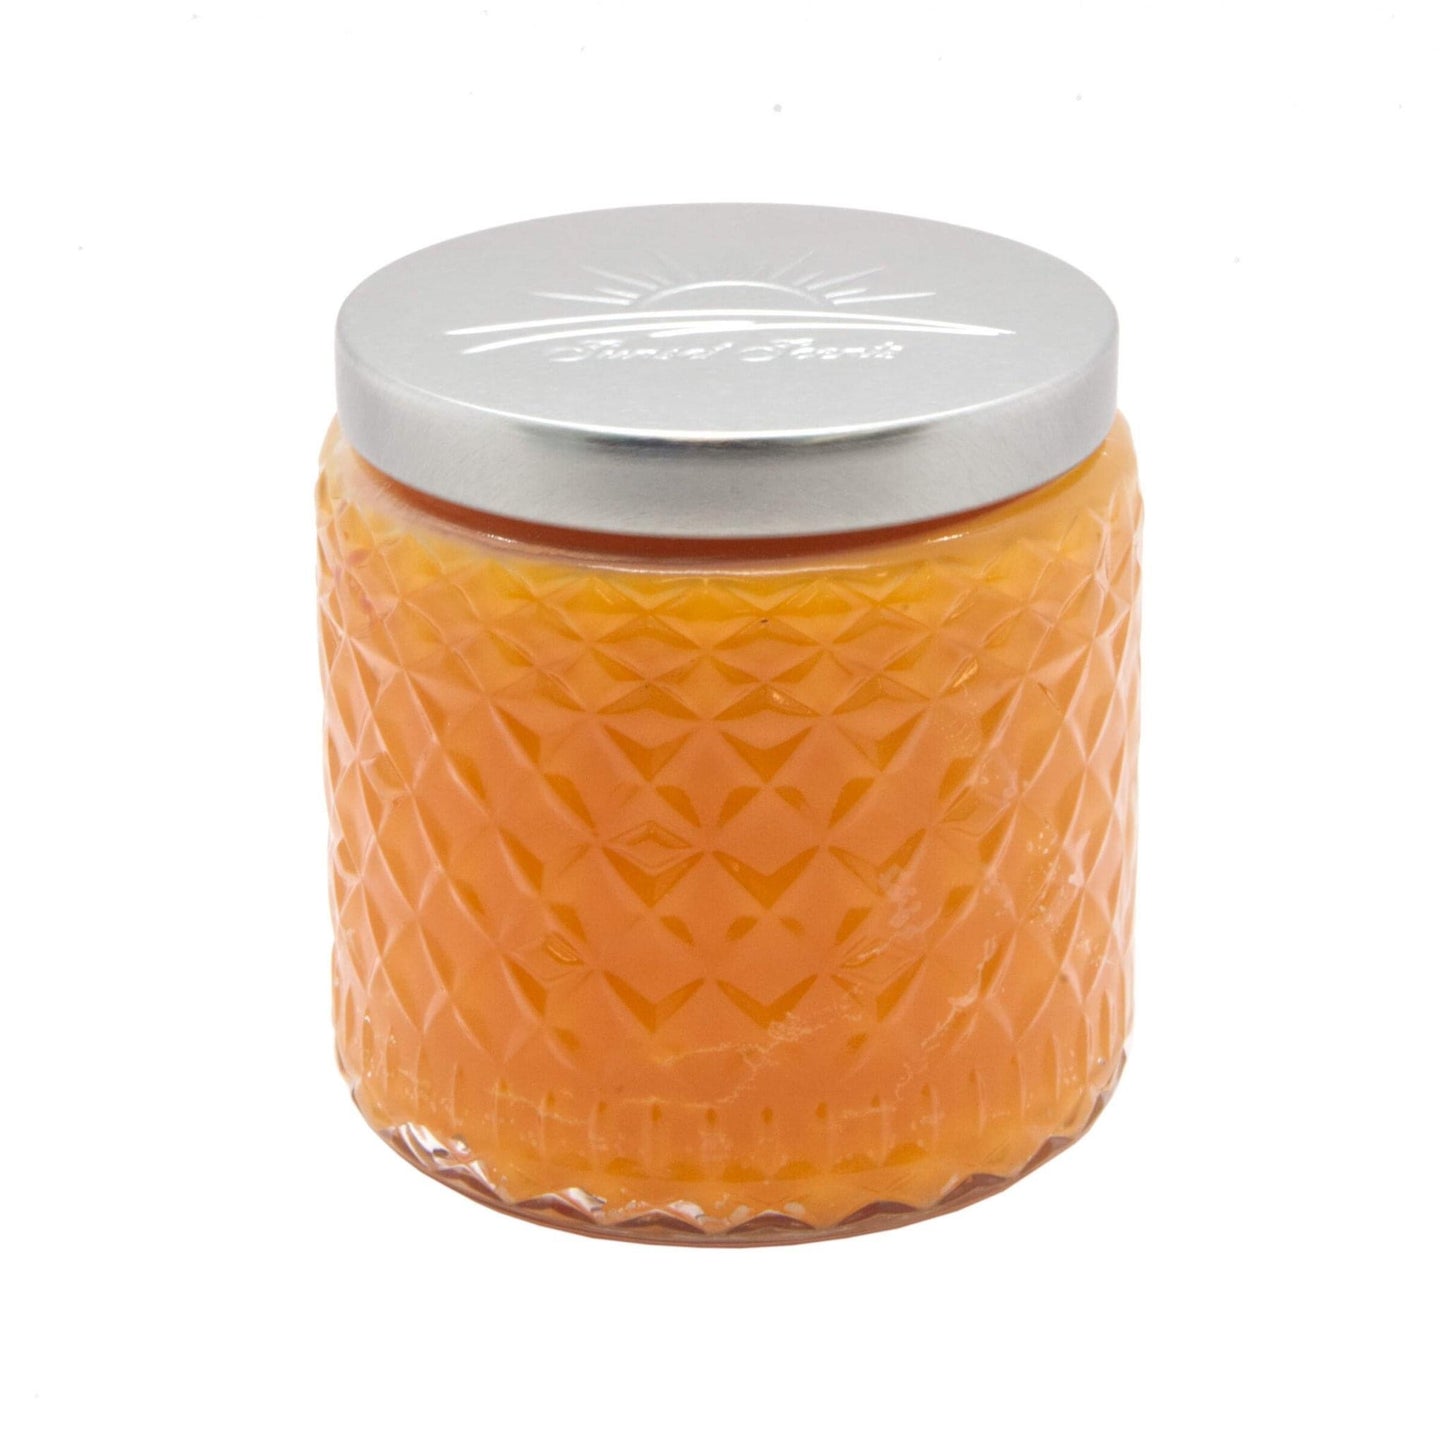 Orange Blossoms Scented Candle